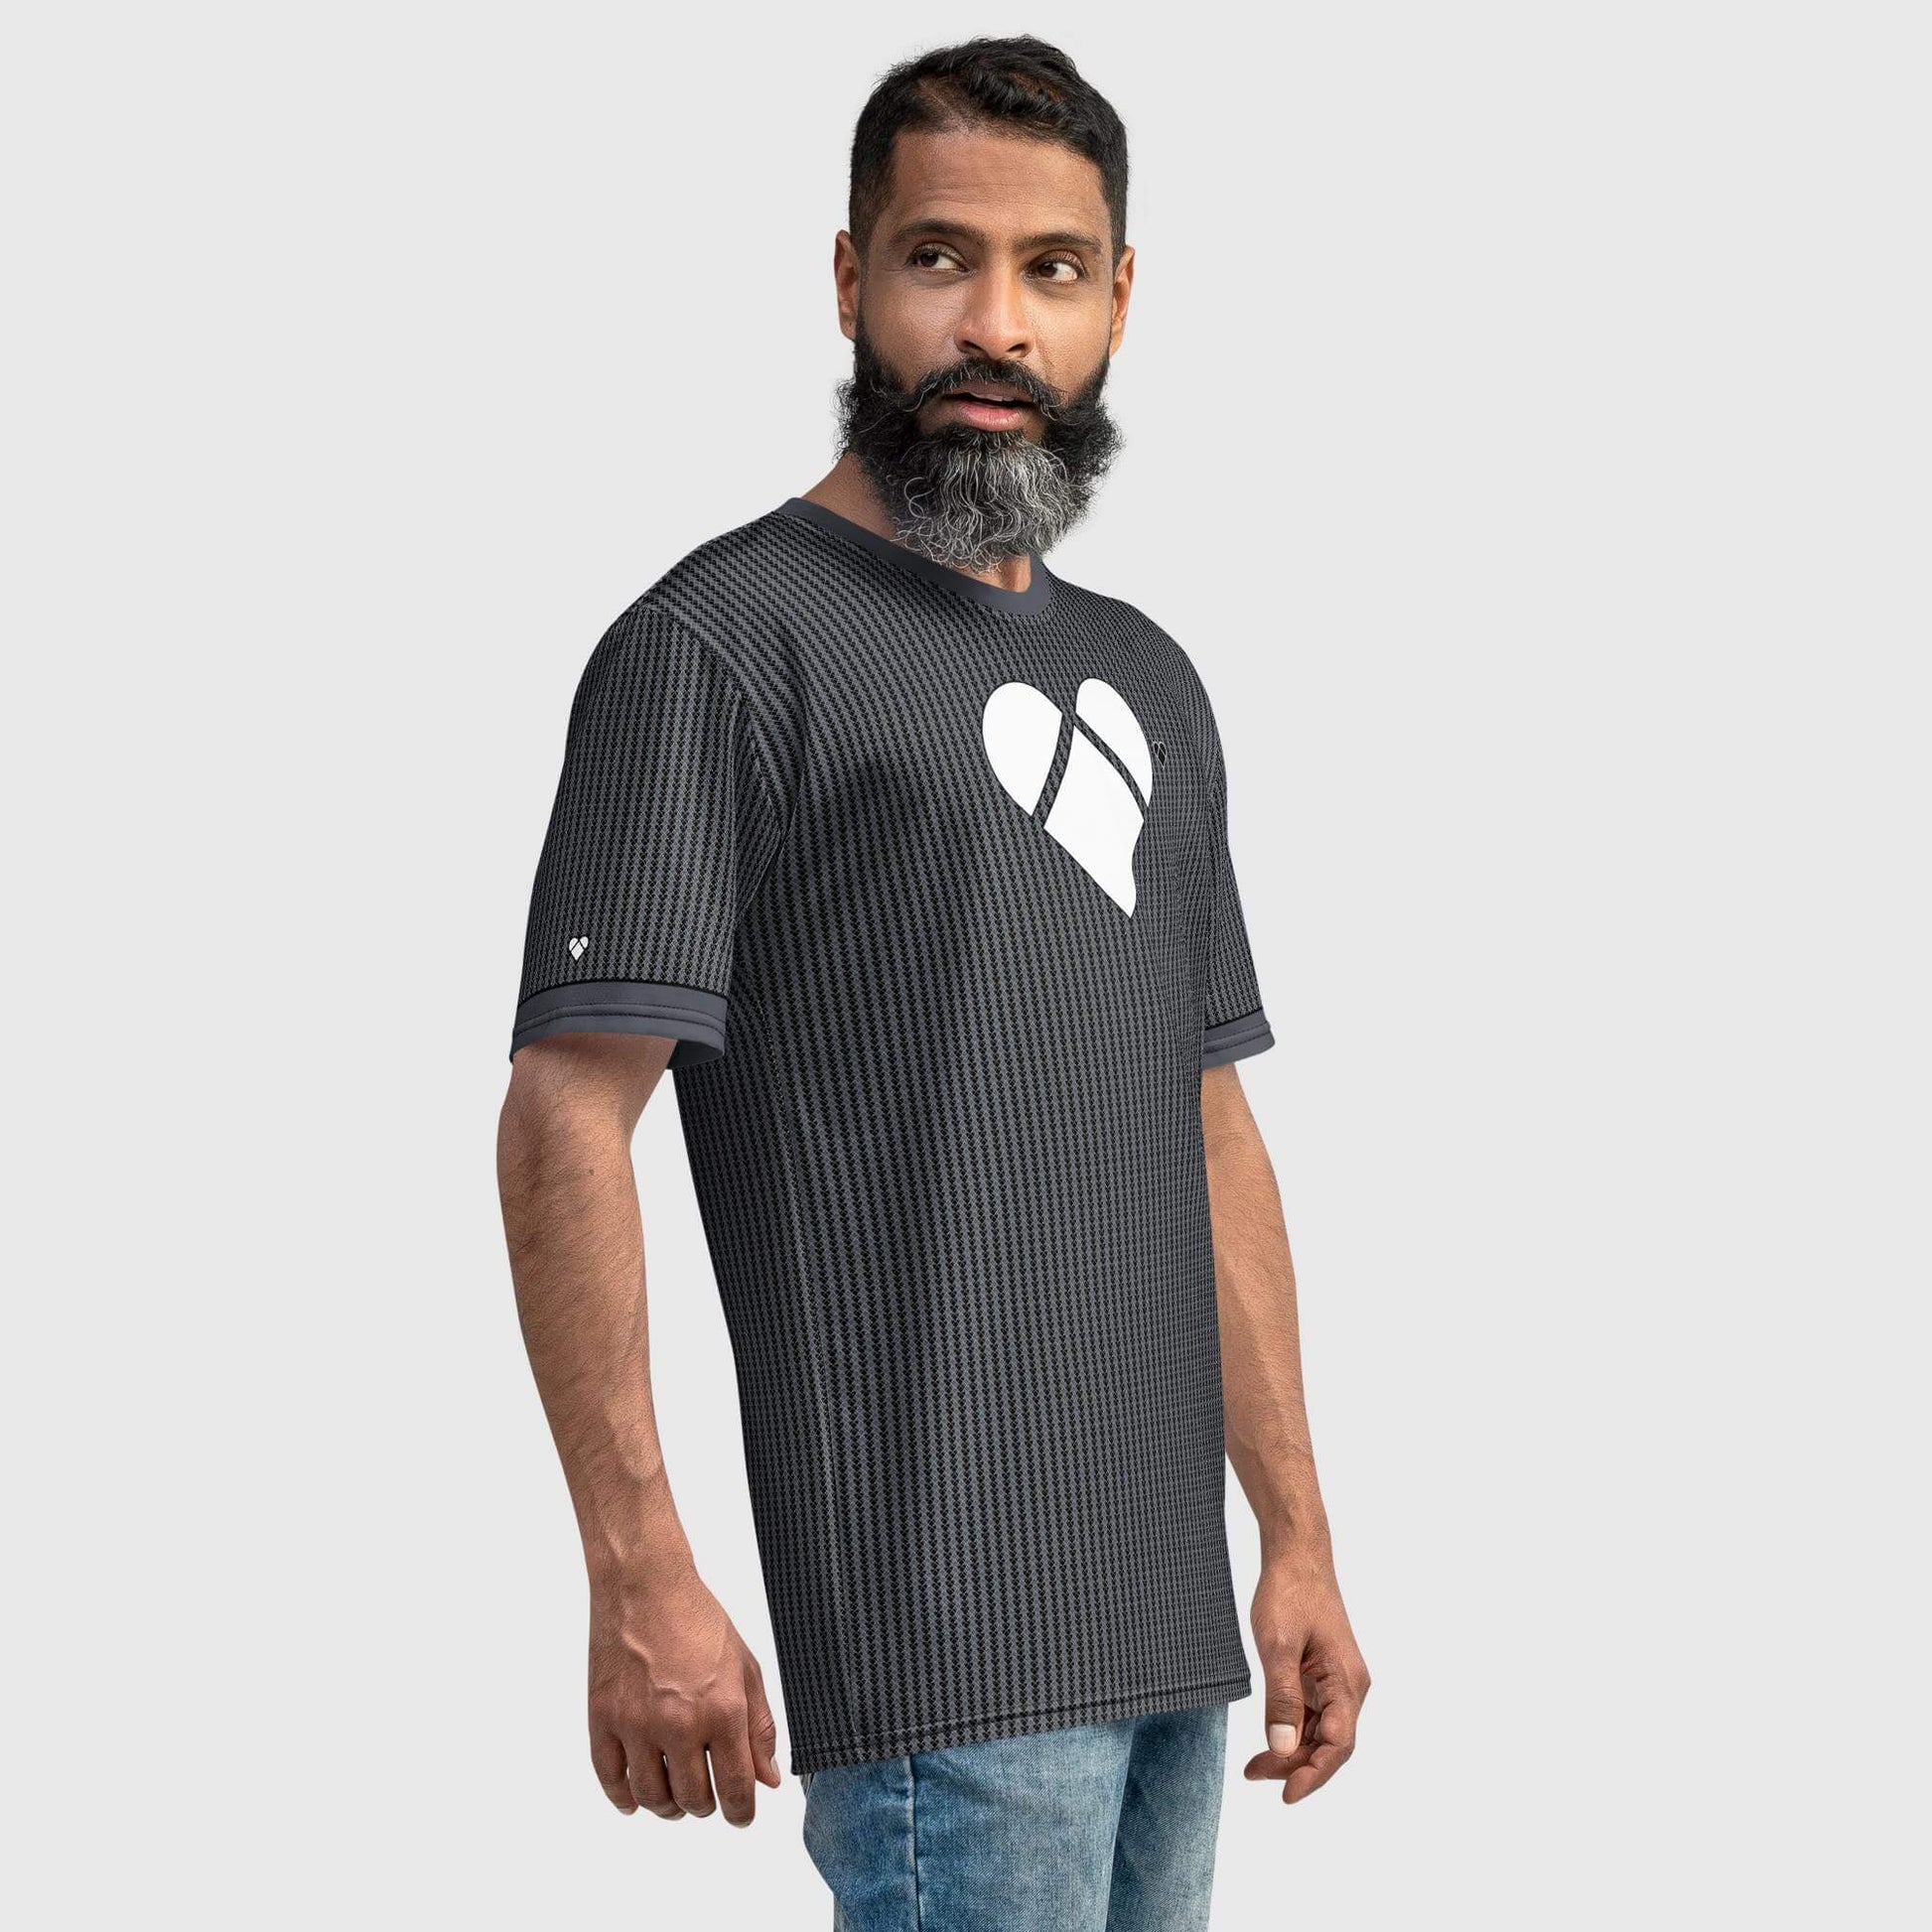 Casual wear black shirt for men with Dualshade lovogram pattern and white heart, male model